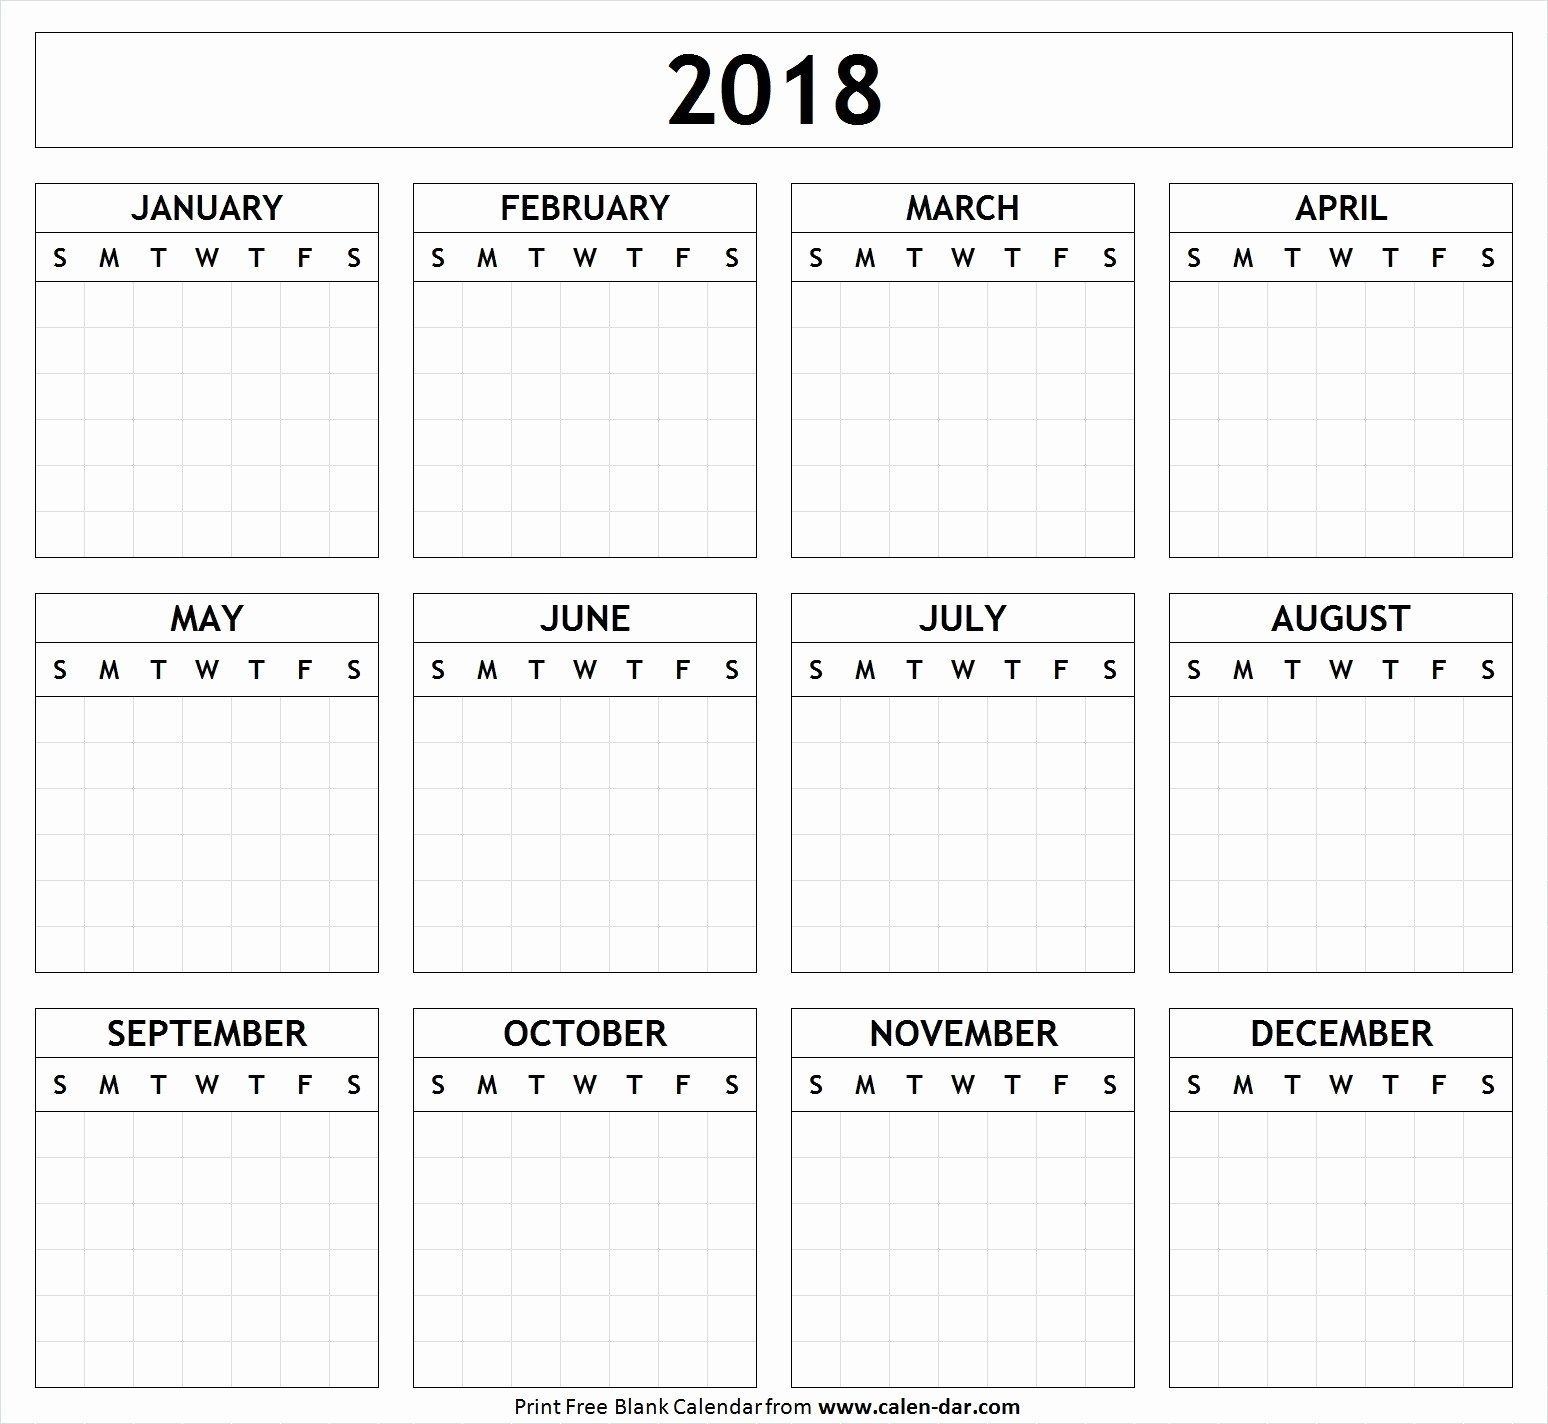 Calendar Template For Pages Mac New Mac Numbers Templates Calendar Template Mac Pages